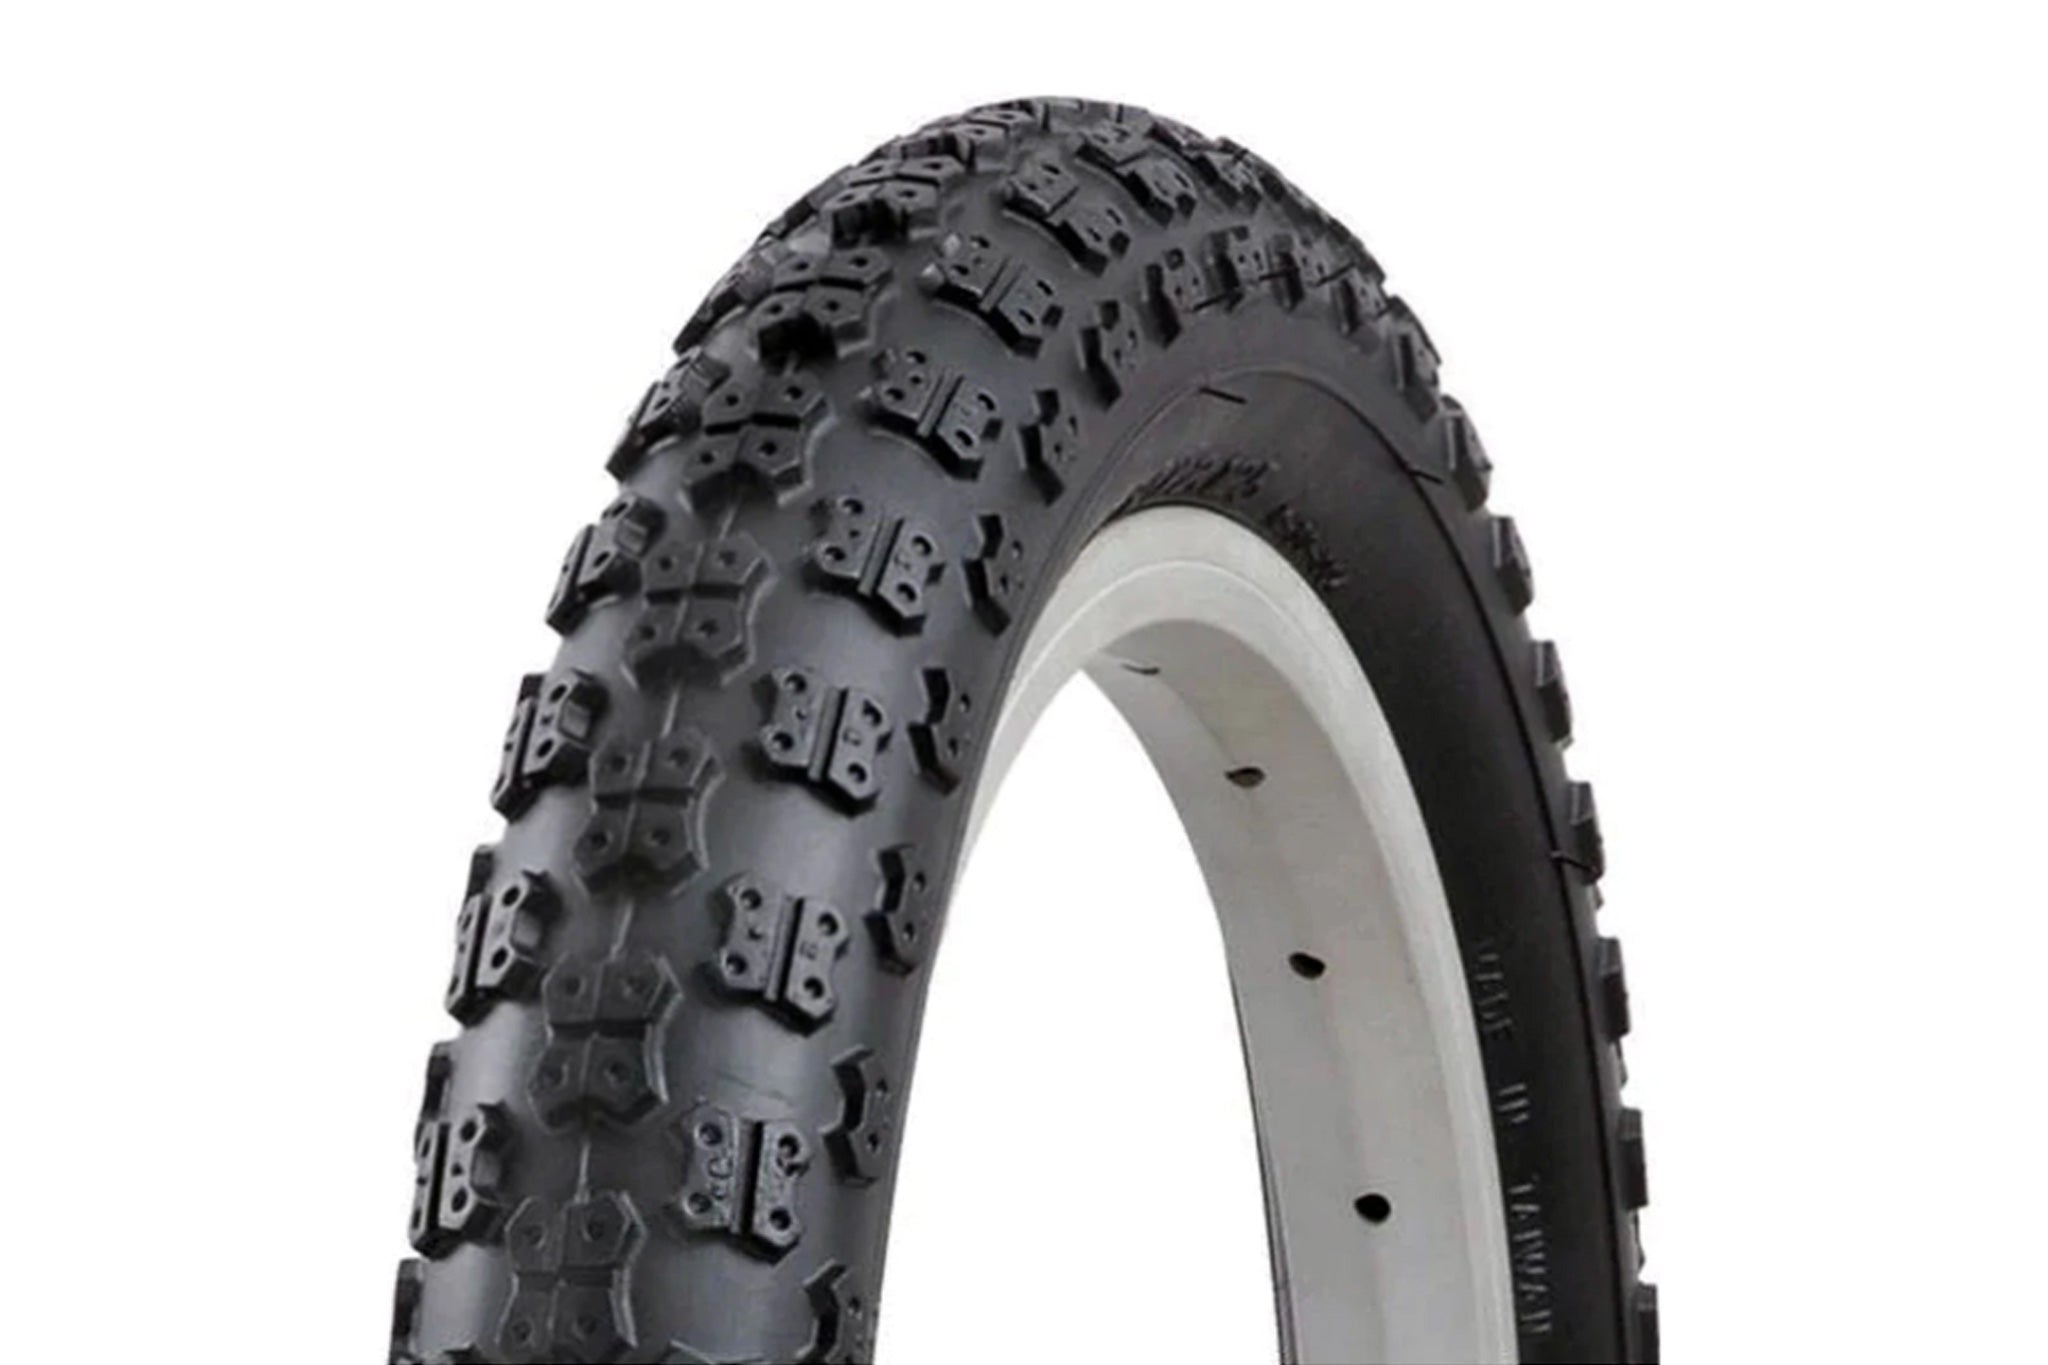 Tioga Comp 3 Style Tyre by Kenda